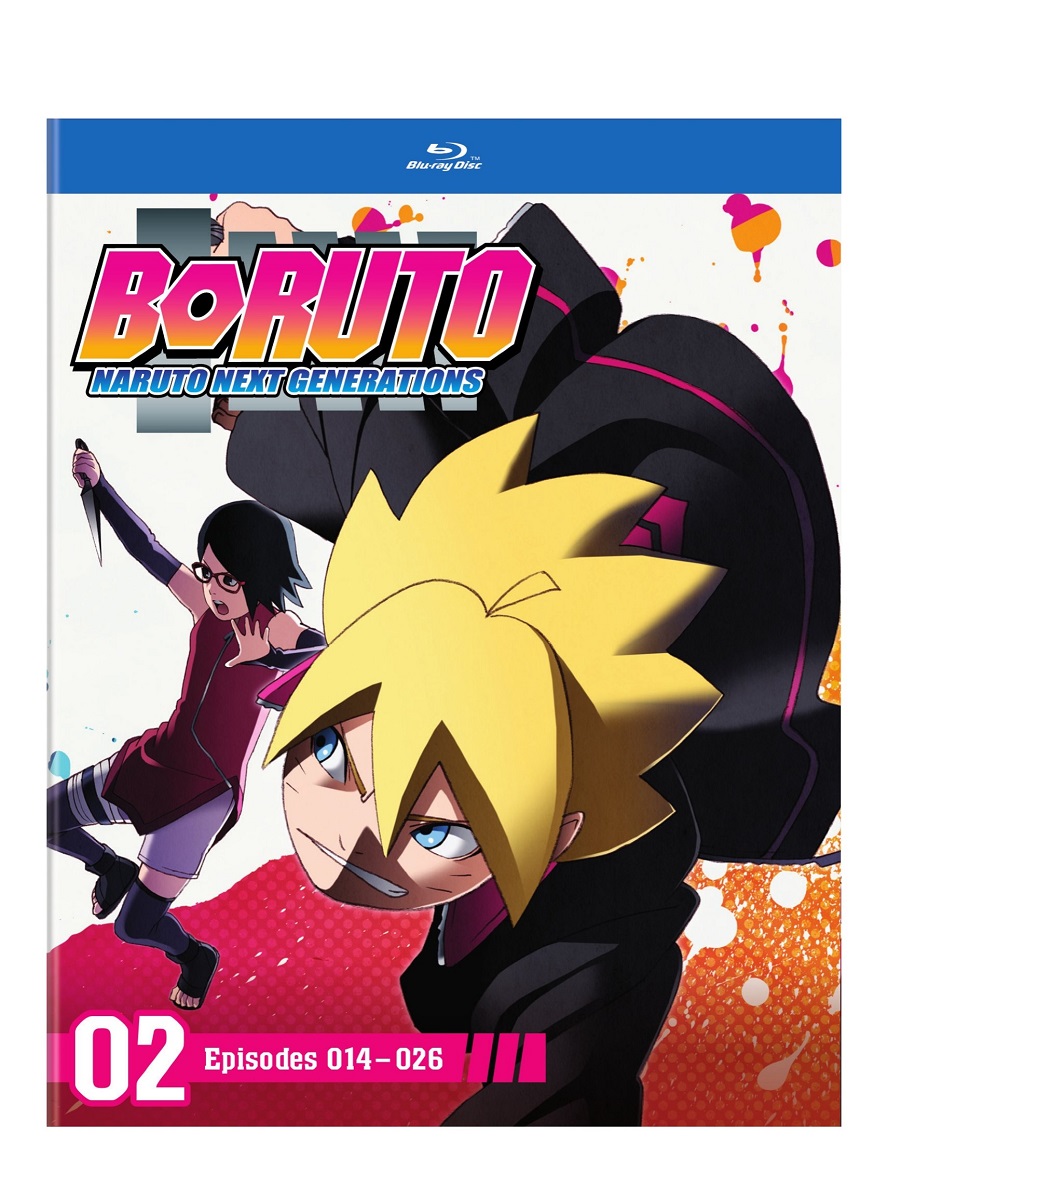 Crunchyroll - Today's the last day of the special 2-Day Boruto